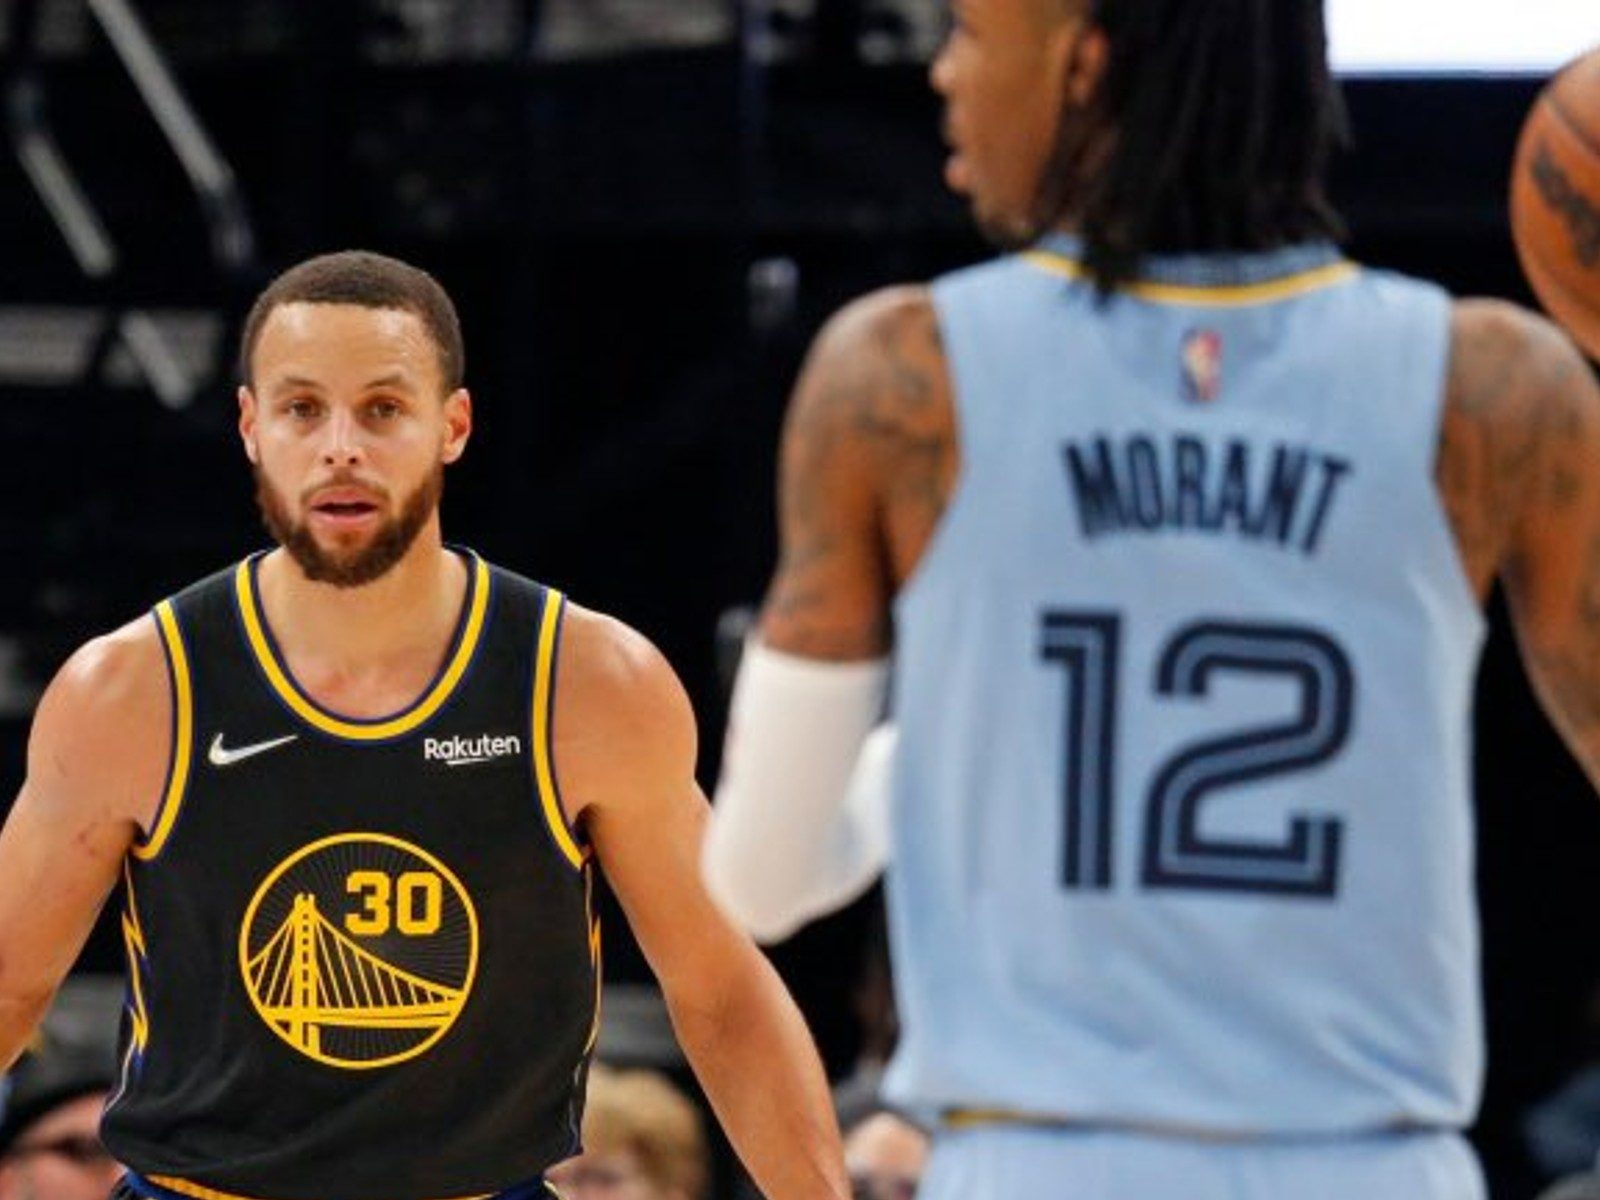 Memphis Grizzlies vs Golden State Warriors Live Streaming: When and Where  to Watch NBA 2022 Western Conference Semifinals Live Coverage on Live TV  Online - News18